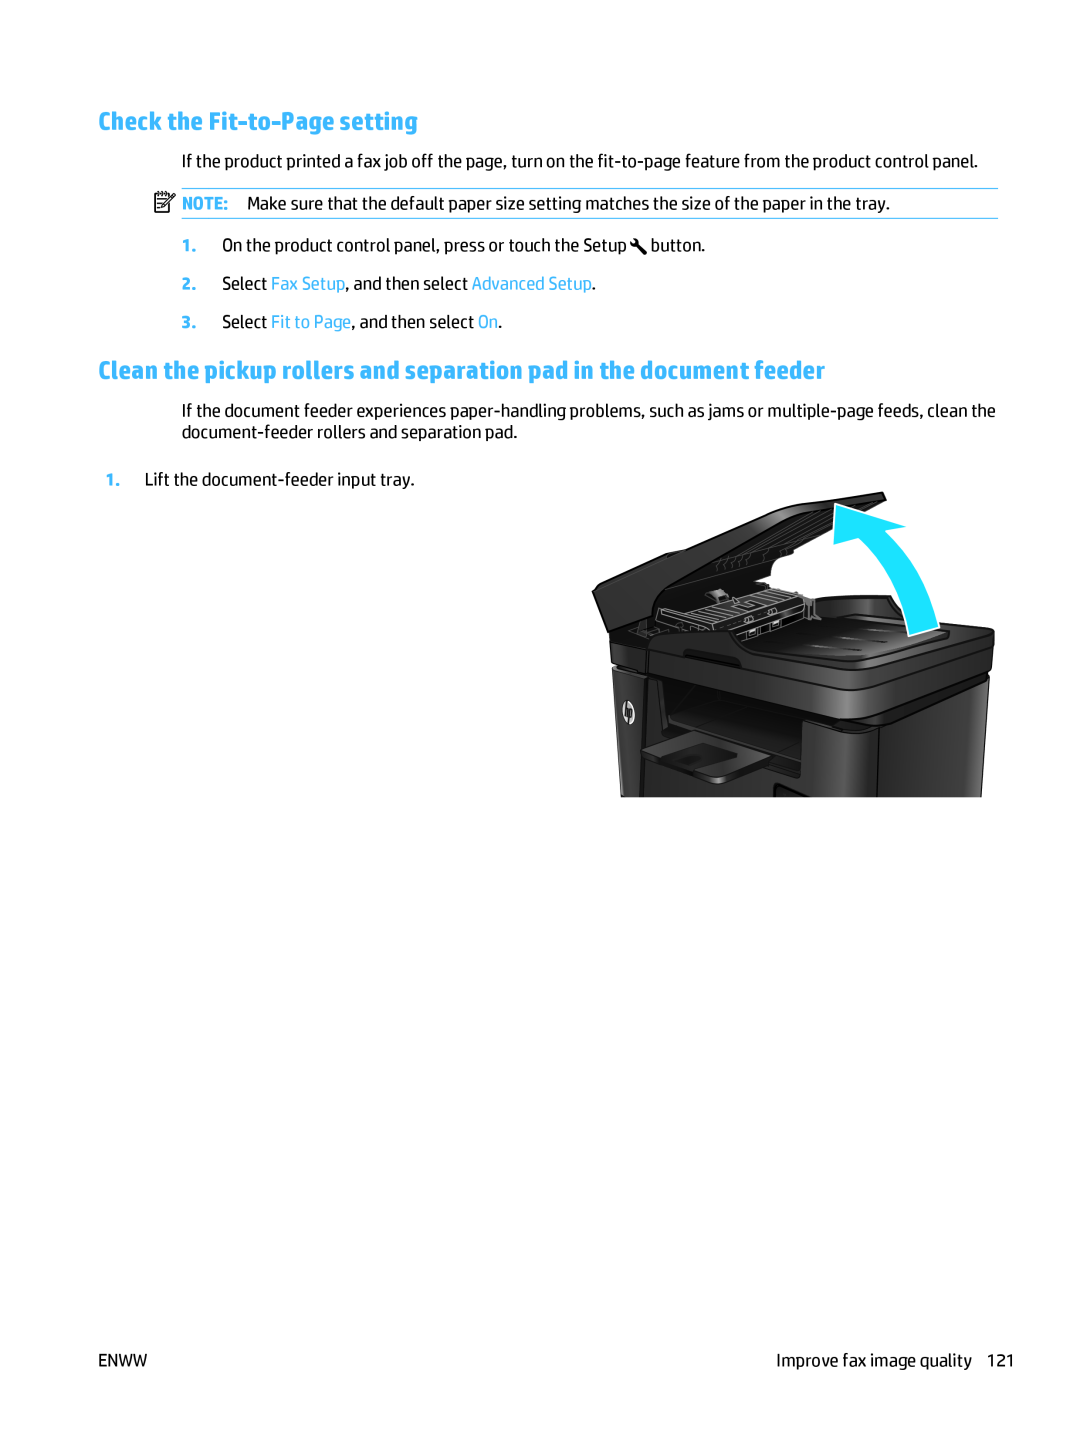 HP MFP M225dw manual Check the Fit-to-Page setting, Clean the pickup rollers and separation pad in the document feeder 